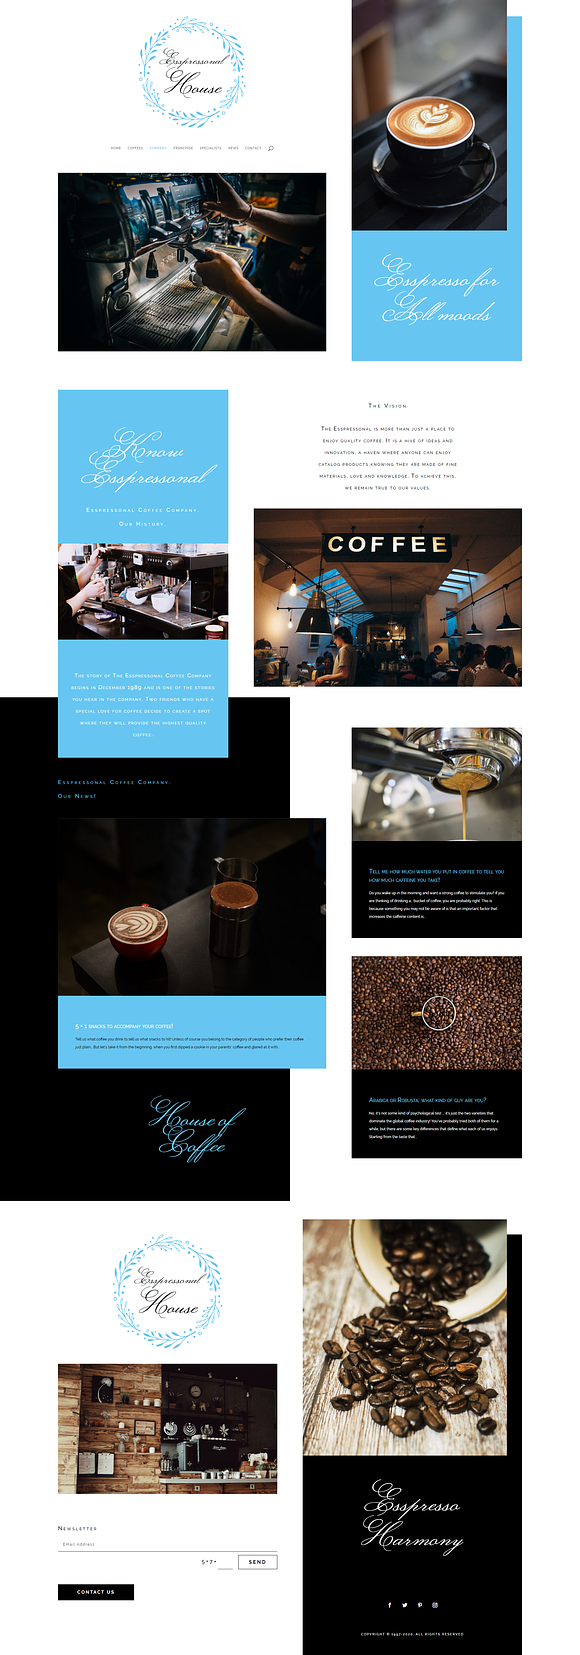 Esspressonal in WordPress Business Themes - product preview 3